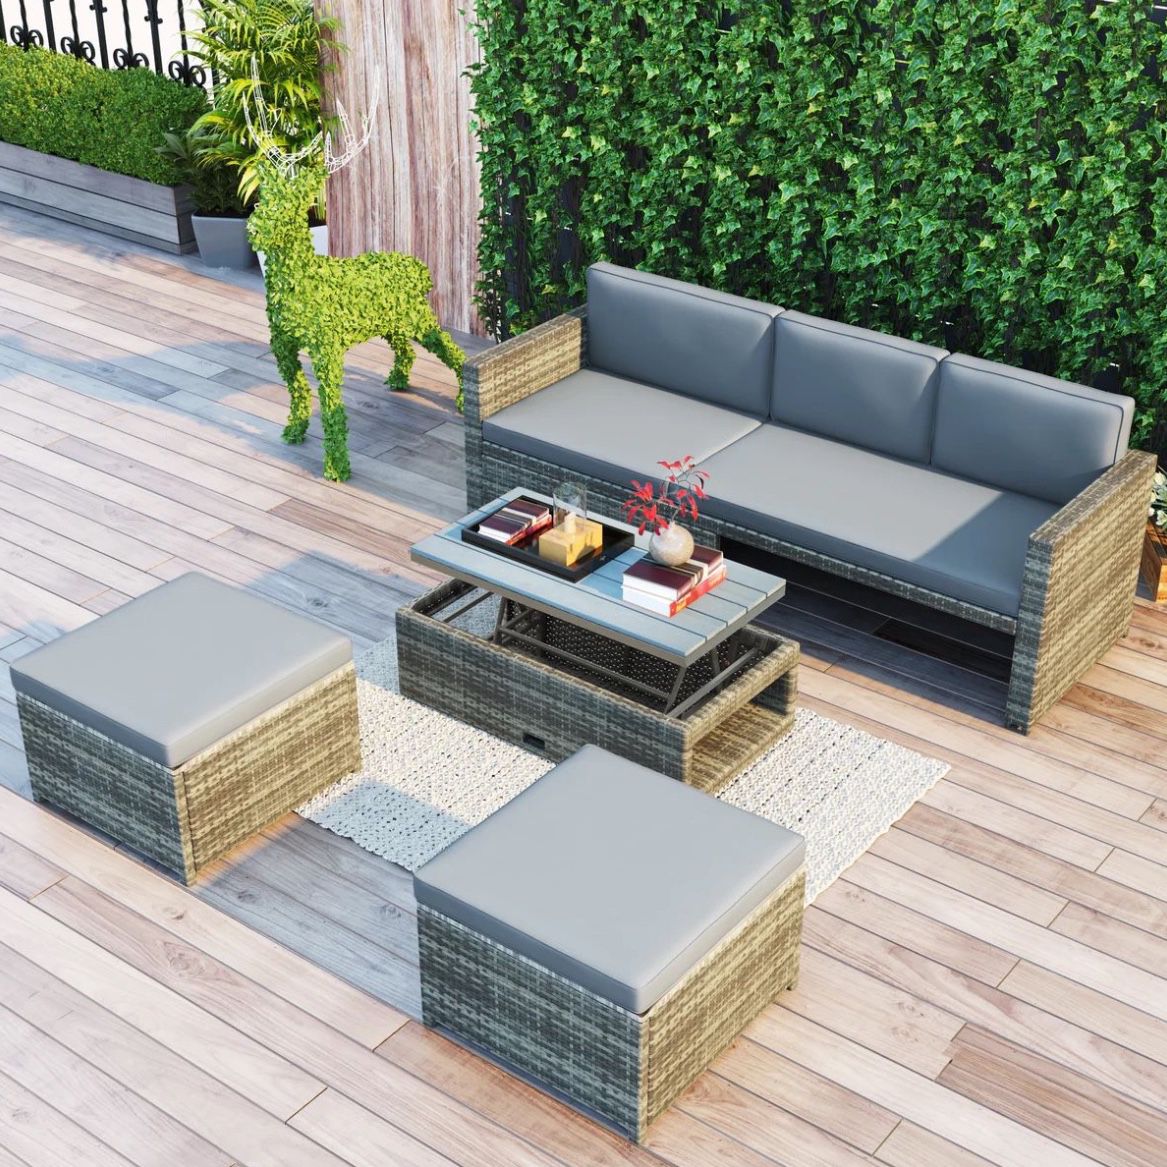 4-Piece Outdoor Patio PE Wicker Sectional Conversation Set: 83” Sofa / 2 Ottomans / Lift-Top Table  (Gray Cushions) [NEW IN BOX] **Retails for $874